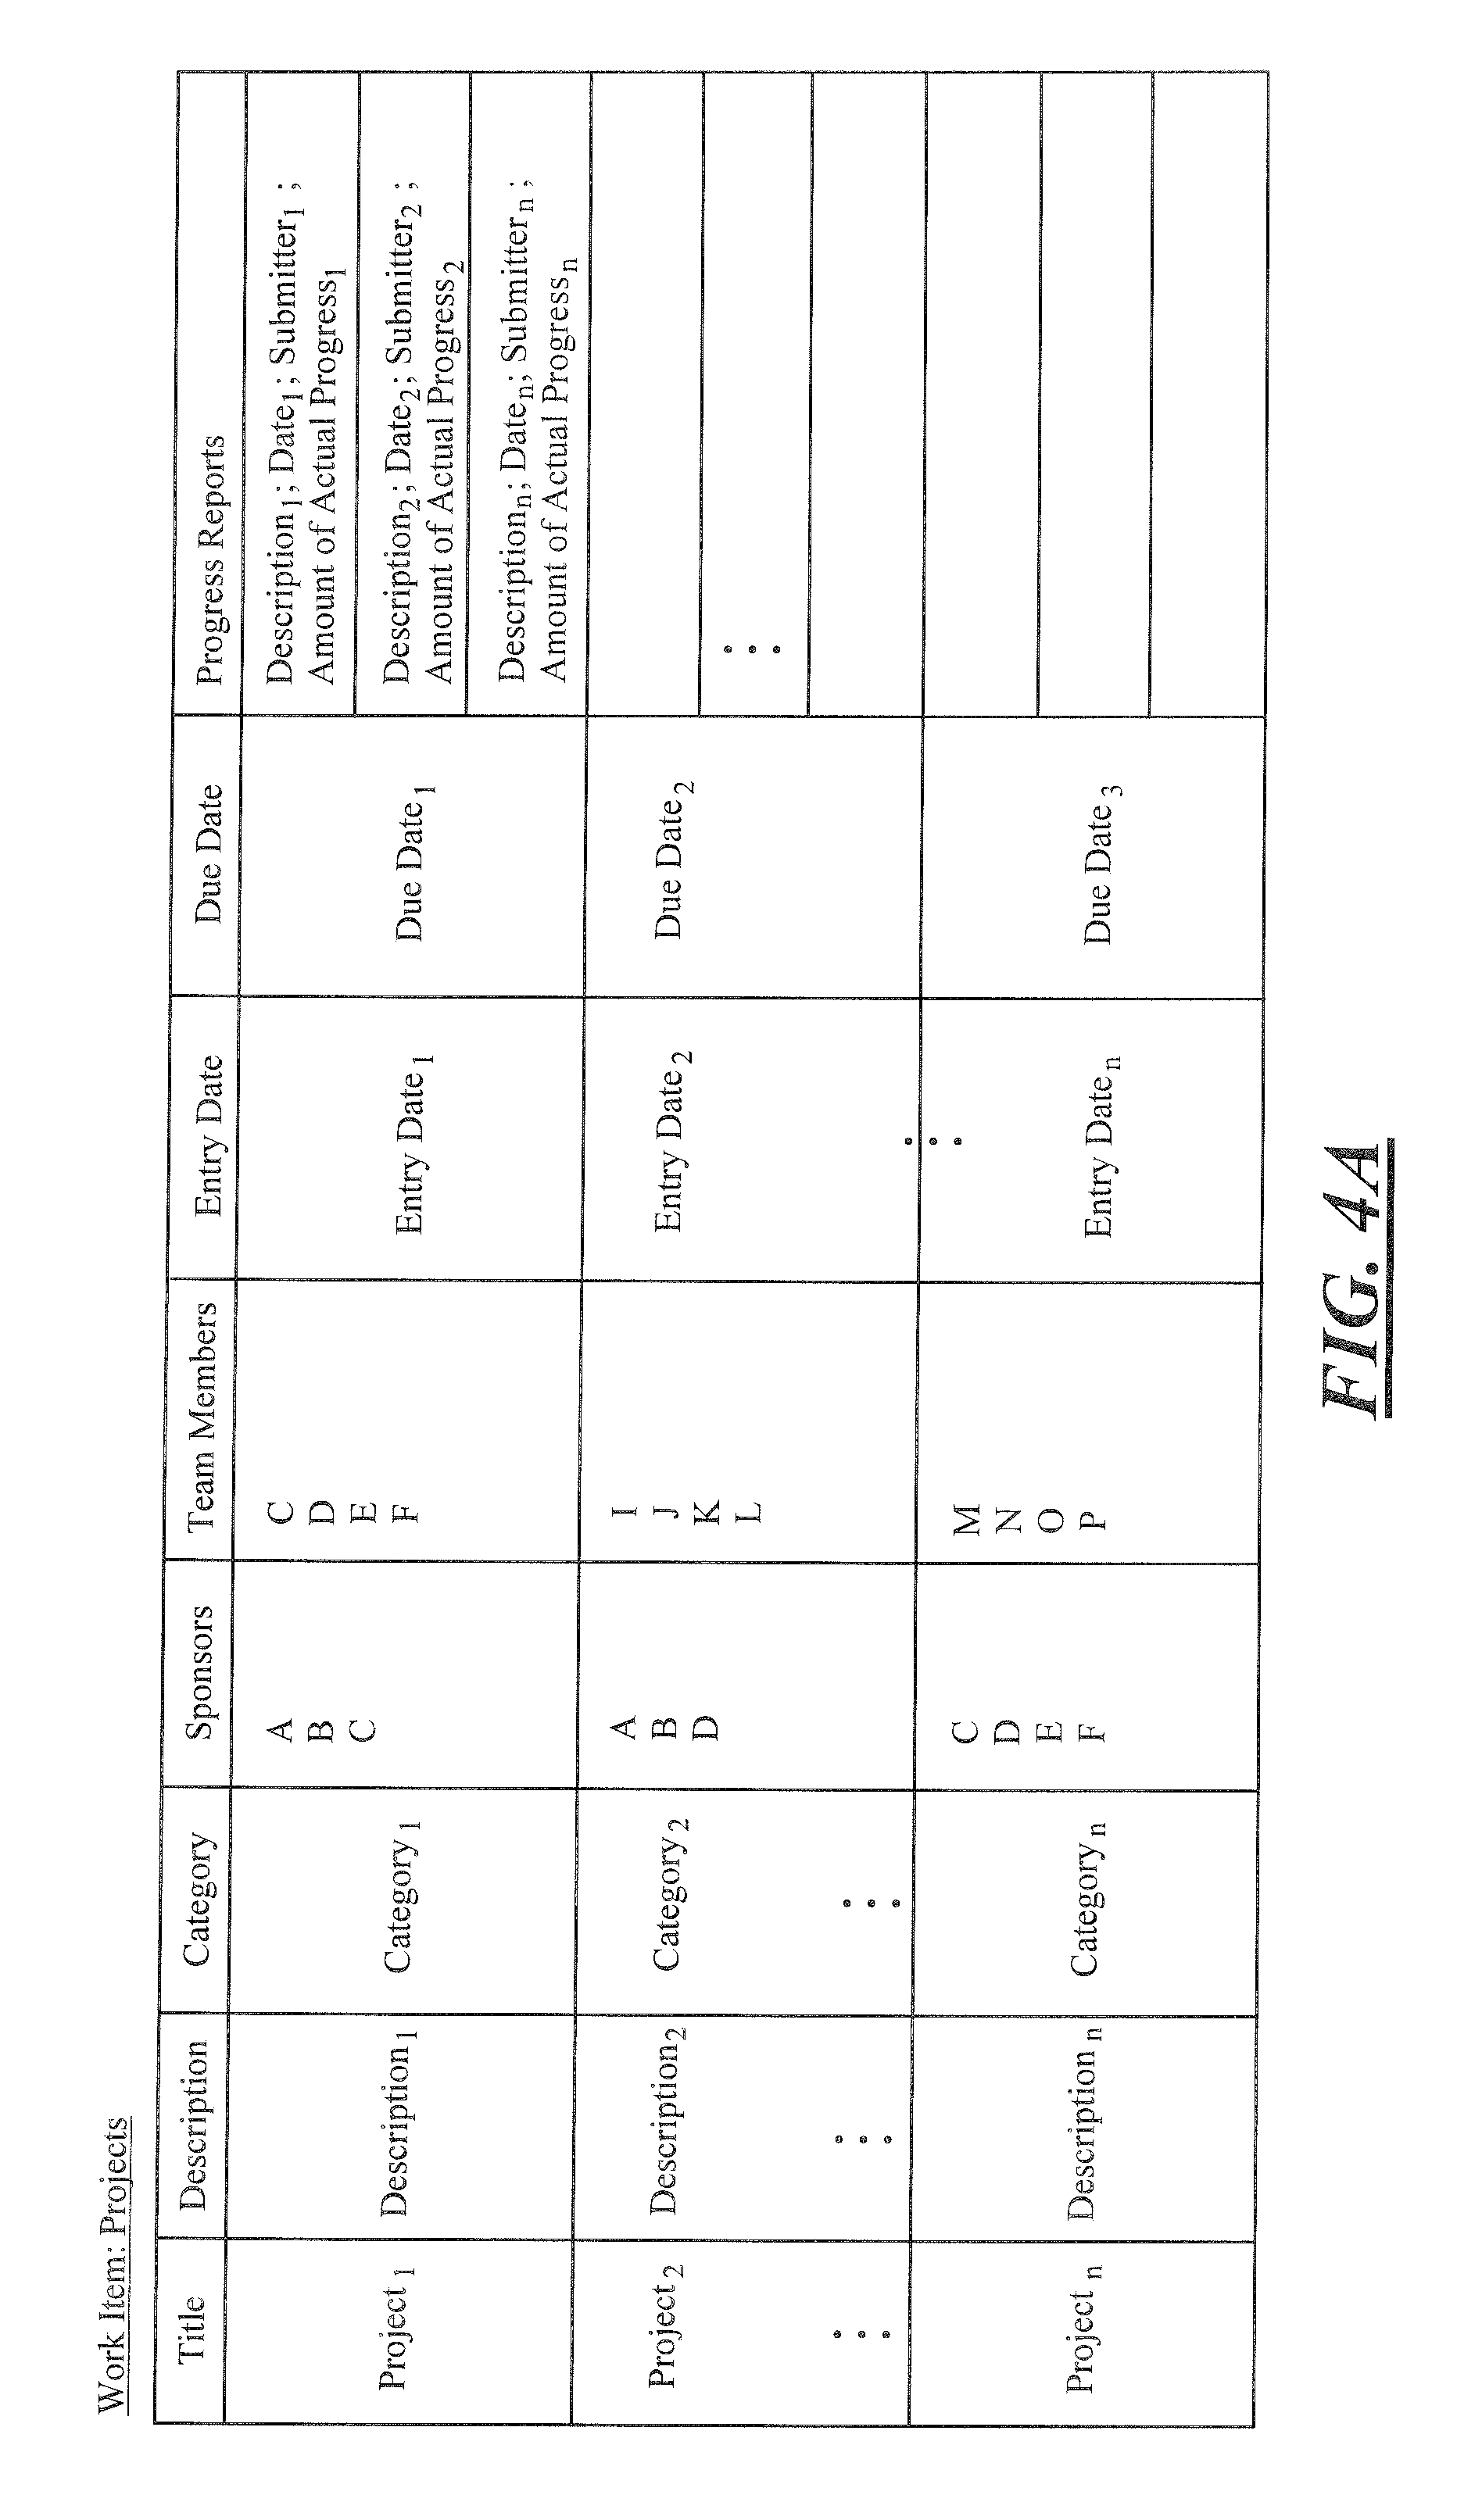 System and method for processing performance data